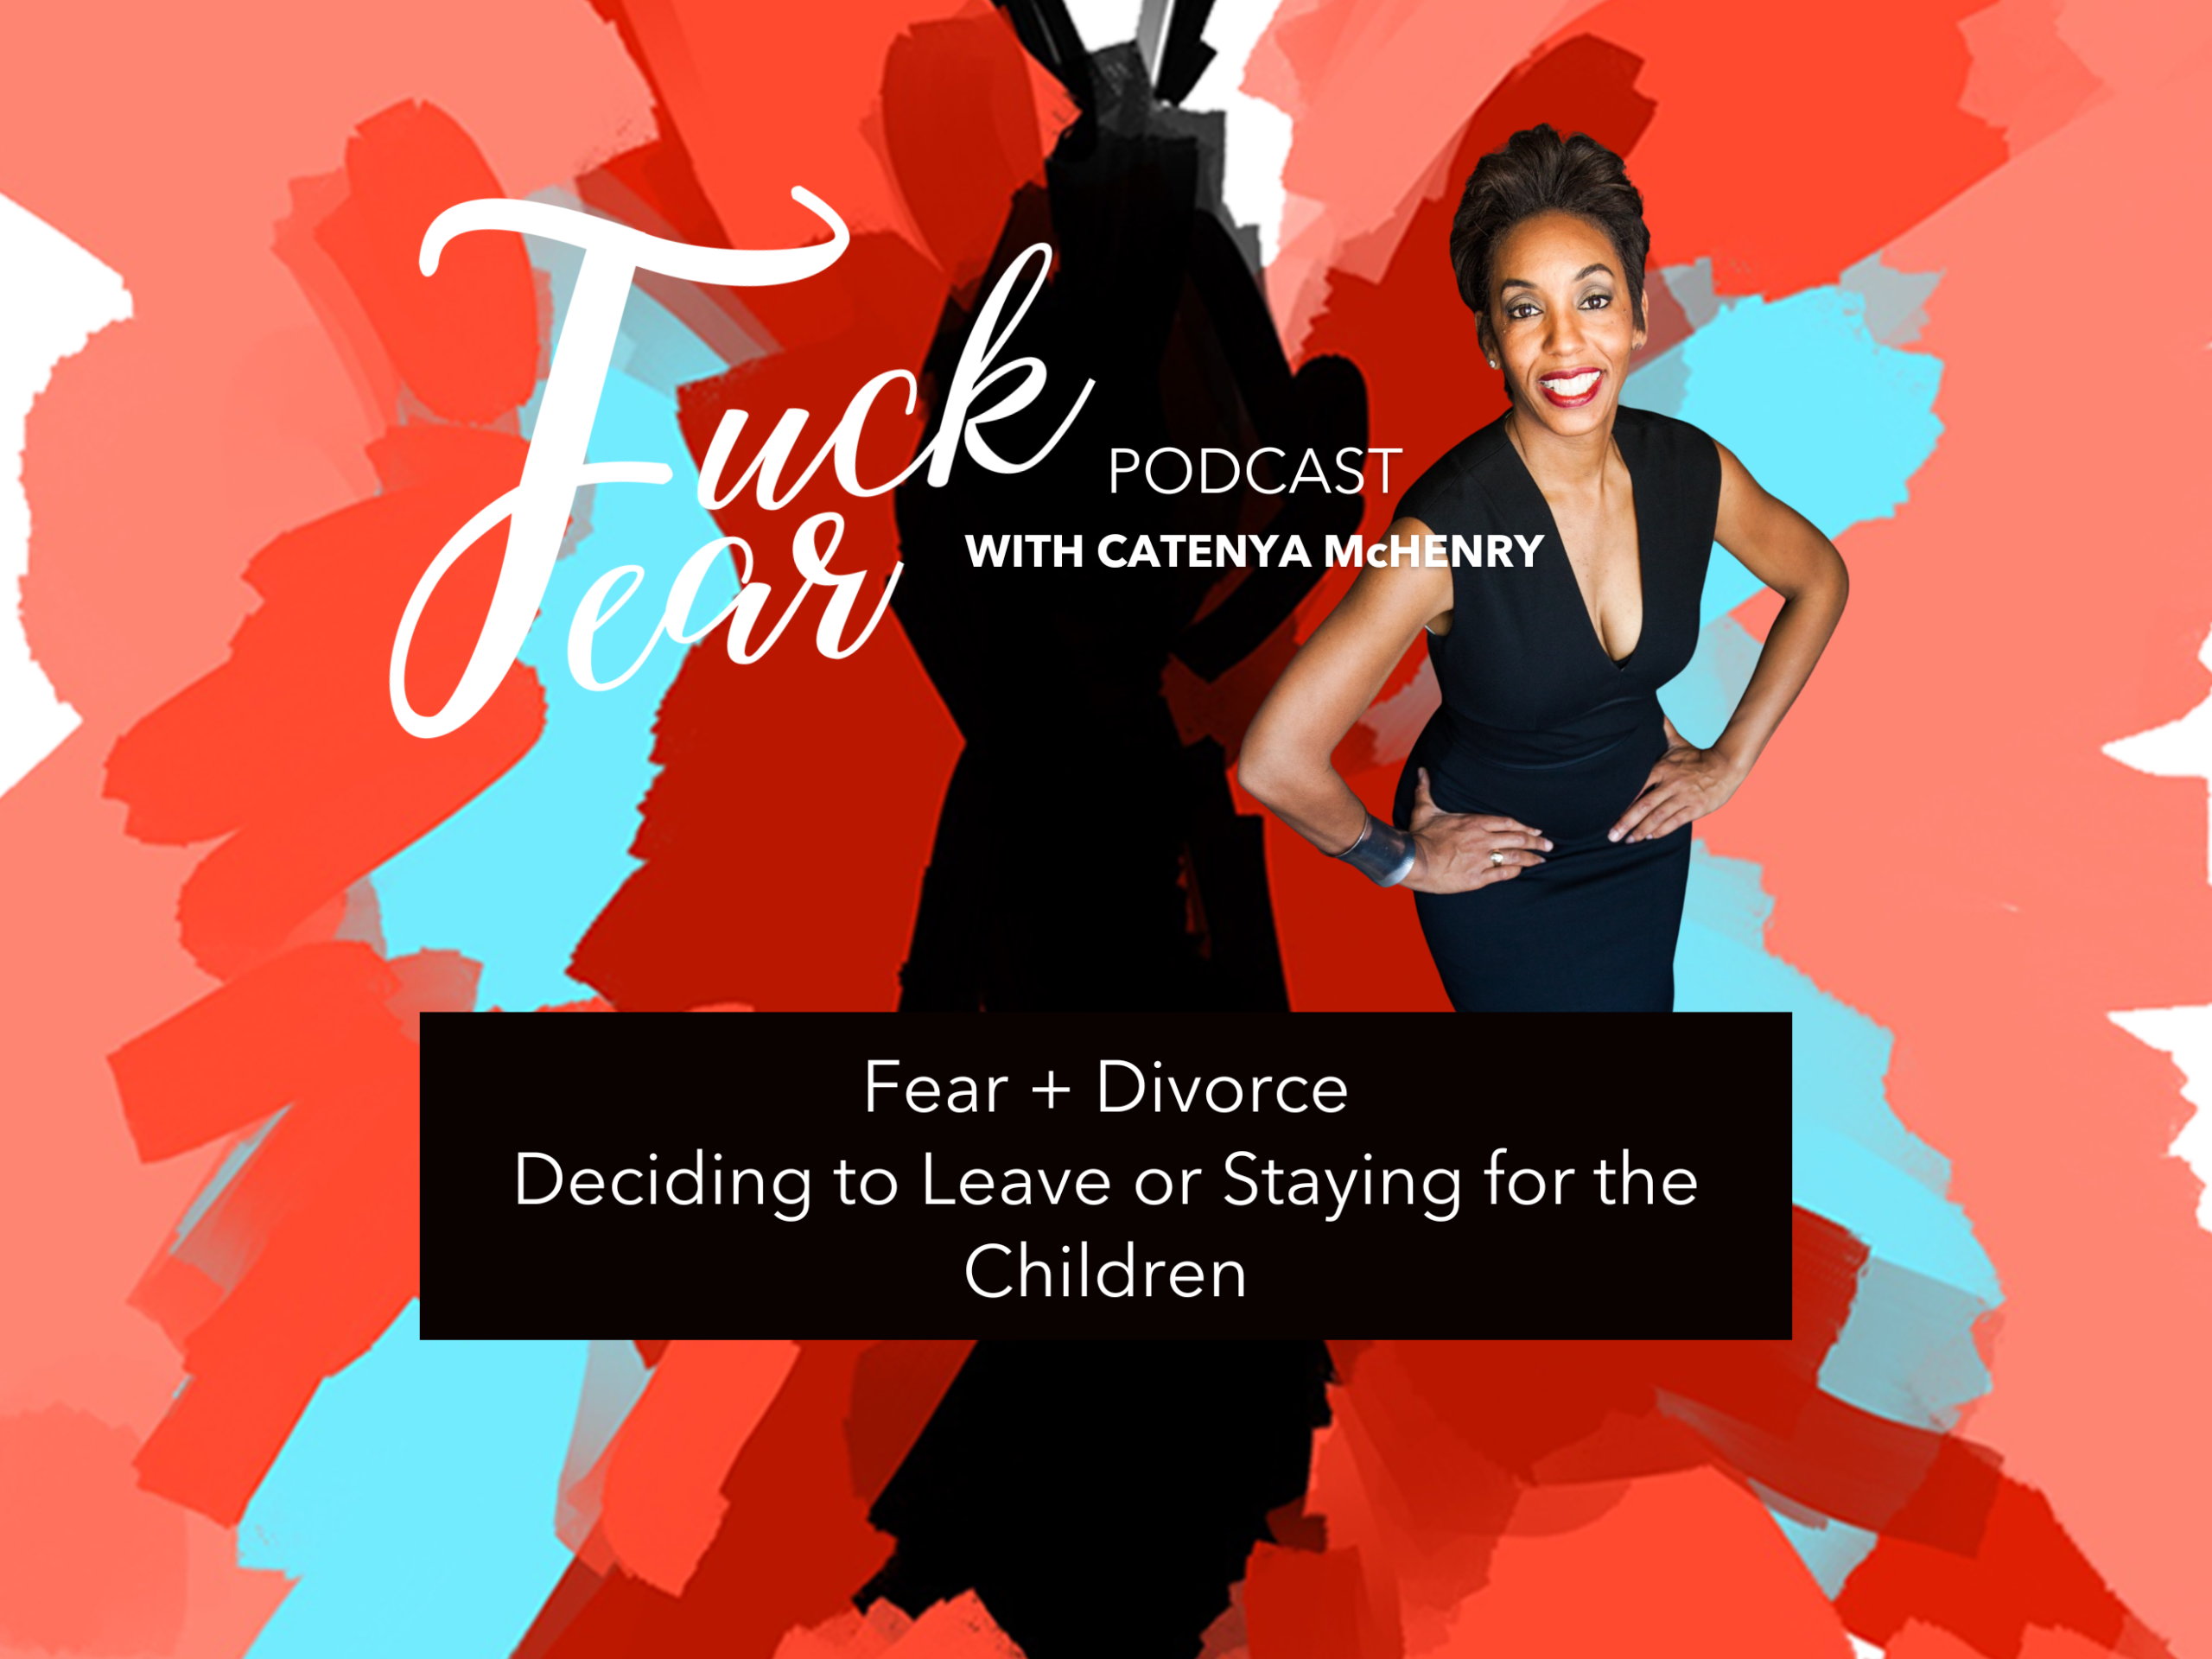 FuckFear Podcast host Catenya McHenry discusses fear and divorce, deciding to leave the relationship or staying to avoid hurting the children on season four episode 1Season 4 episode 1